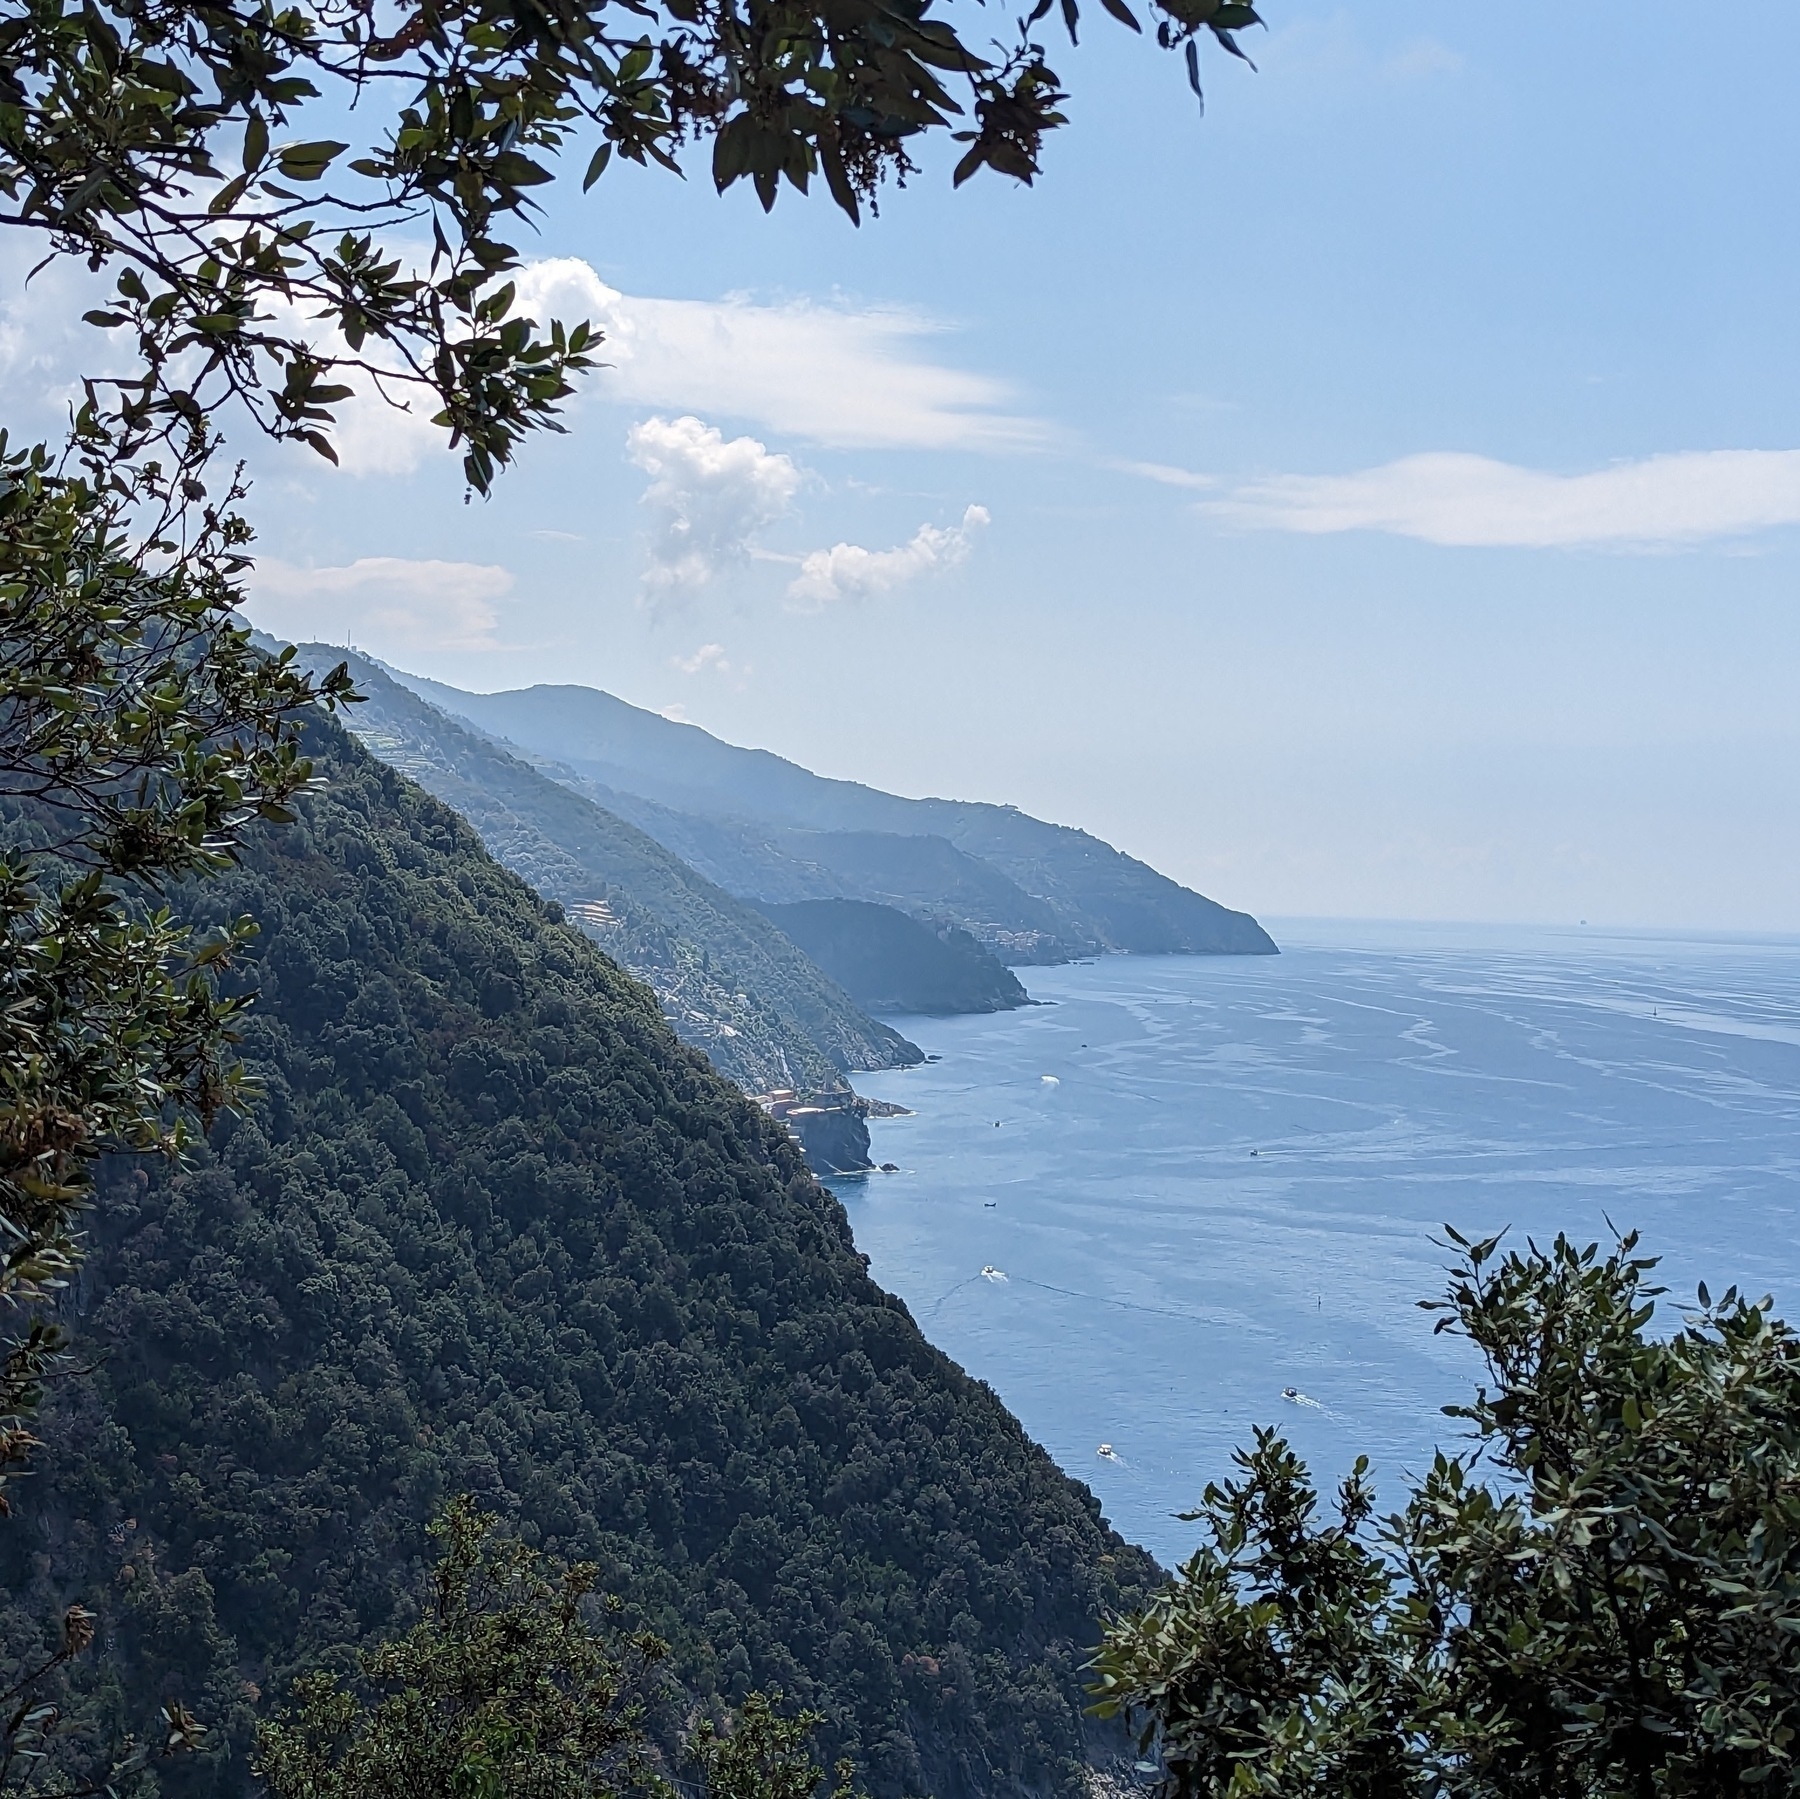 Shot of the coastline along the Gulf of Genova, on a slightly cloudy day, with large hills descending down to the Ligurian Sea. Photo shot through branches of nearby trees.